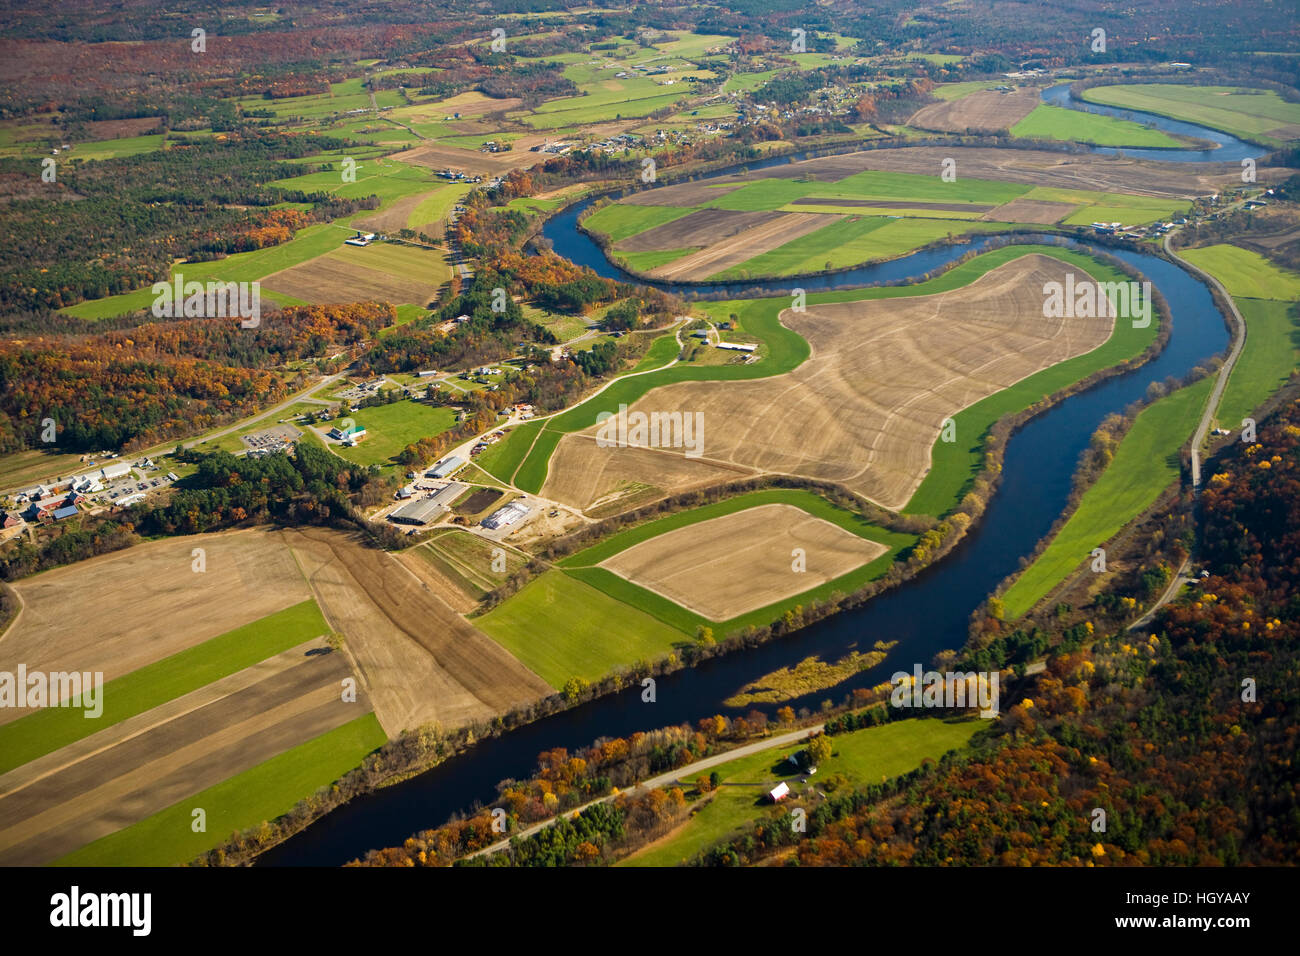 The Connecticut River flows through farmland in Newbury, Vermont and Haverhill, New Hampshire.  Aerial. Stock Photo